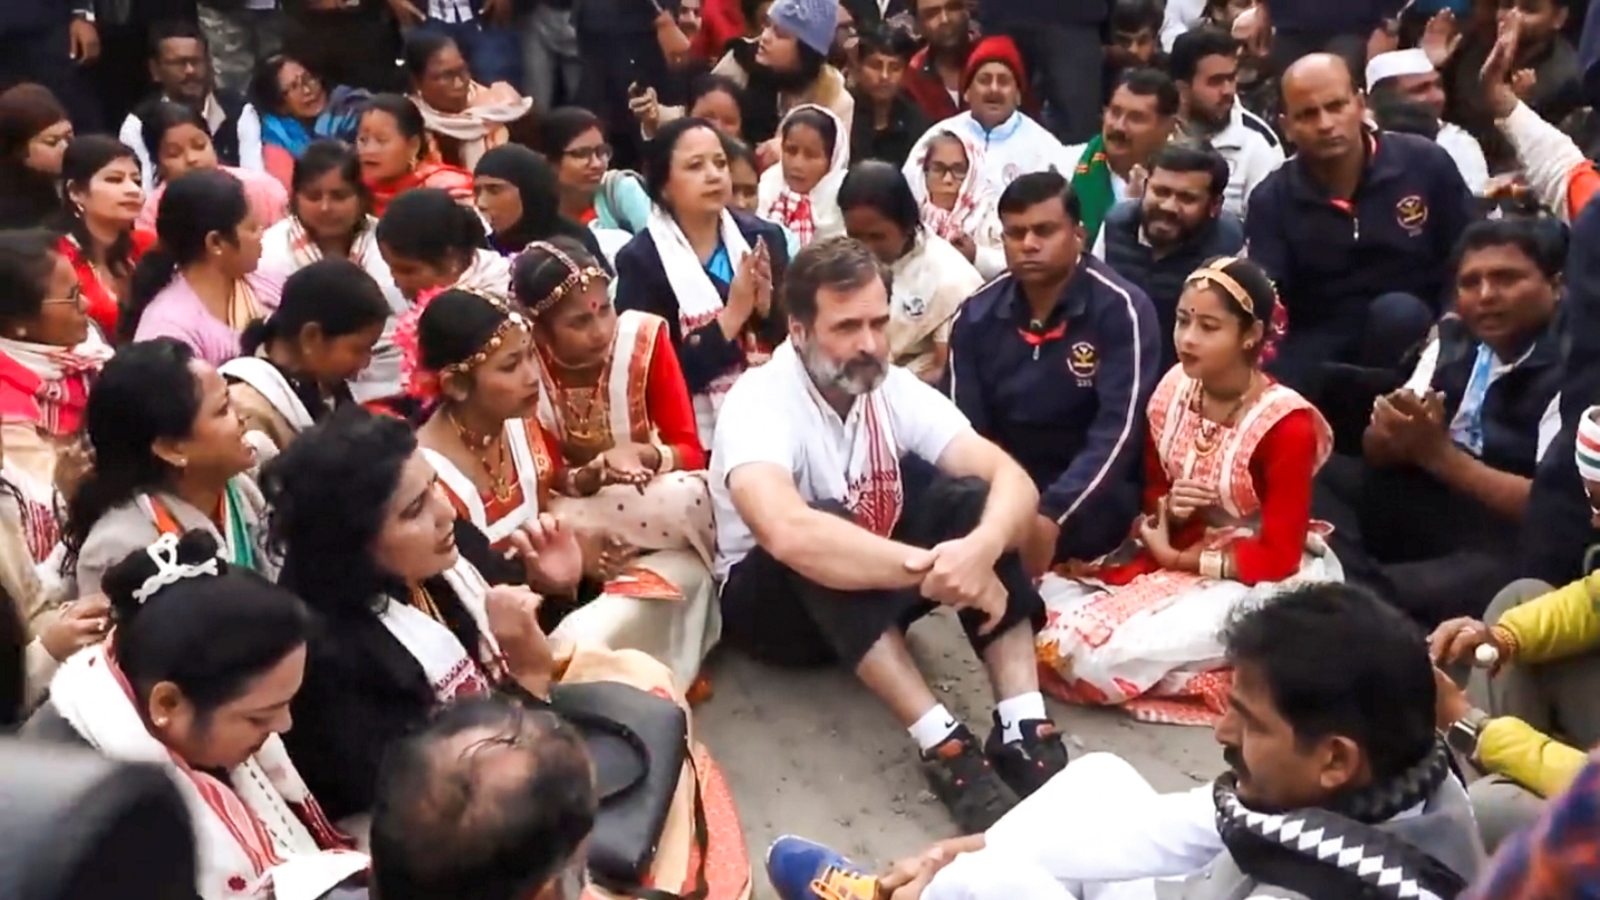 android, ‘will pm modi decide who goes to temples?’: rahul gandhi after being ‘stopped from visiting shrine’ in assam